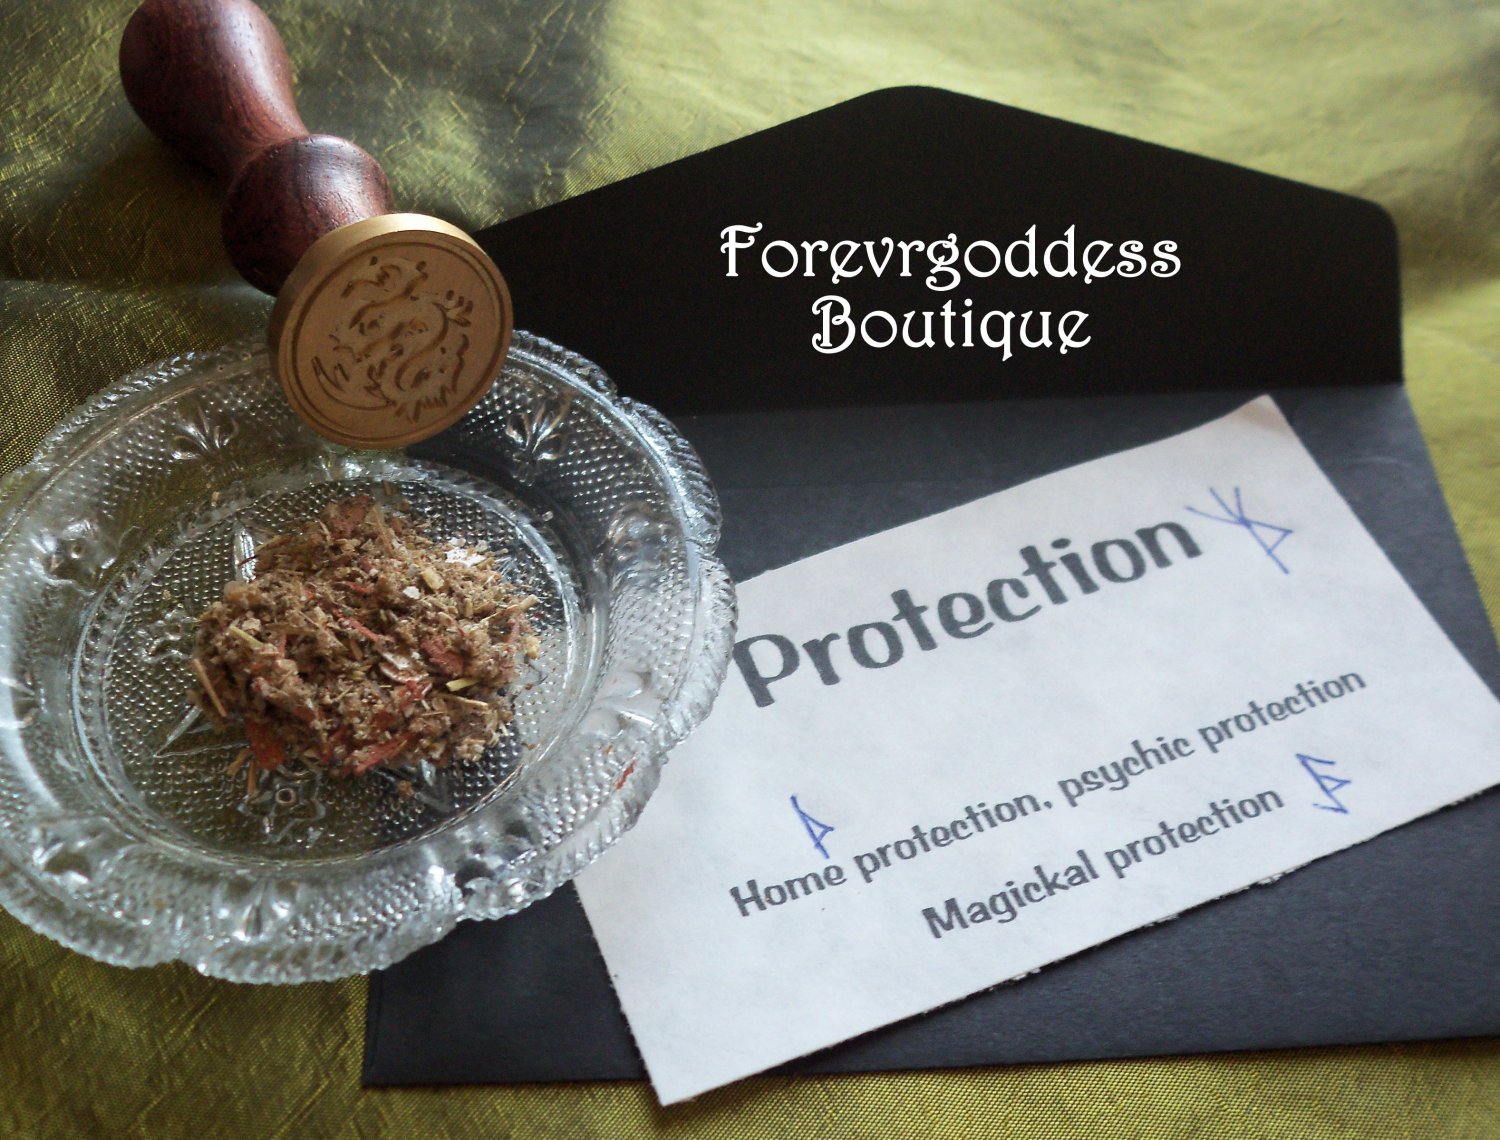 Enchanted offerings: protection